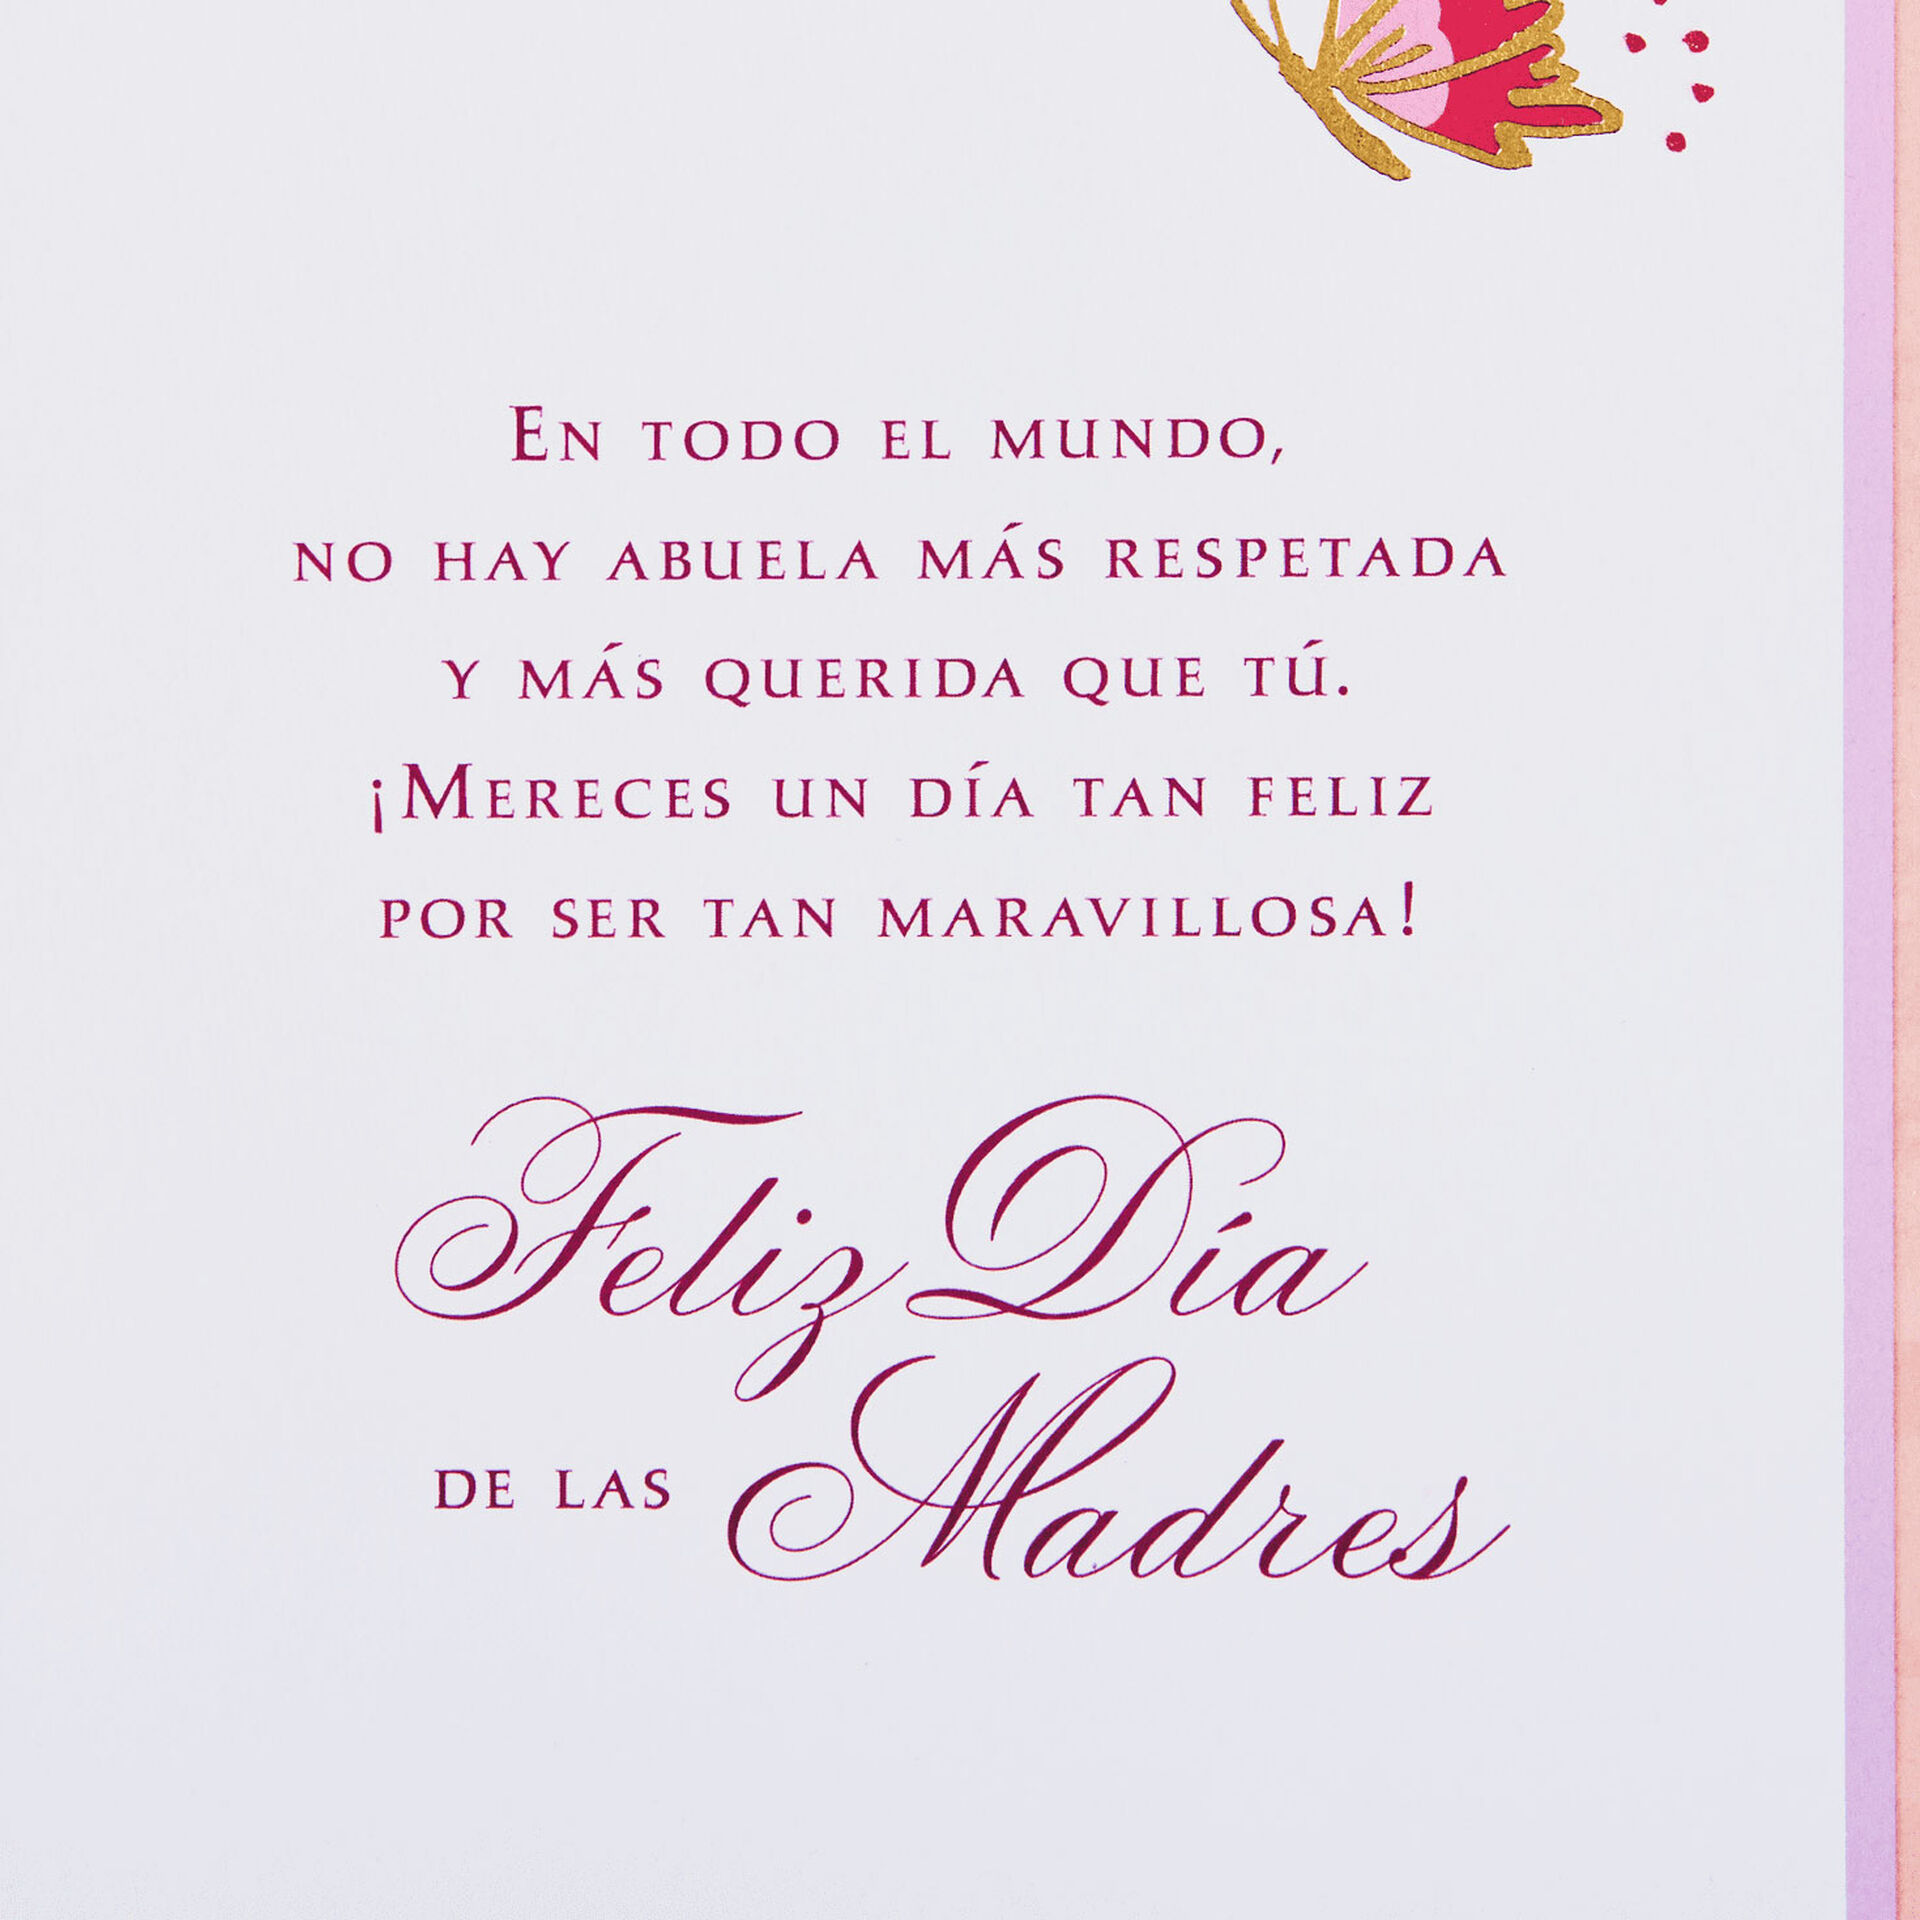 Happy Mothers Day Image In Spanish Mother\'s Day Saying In Spanish ~
Mothers Day Quotes In Spanish